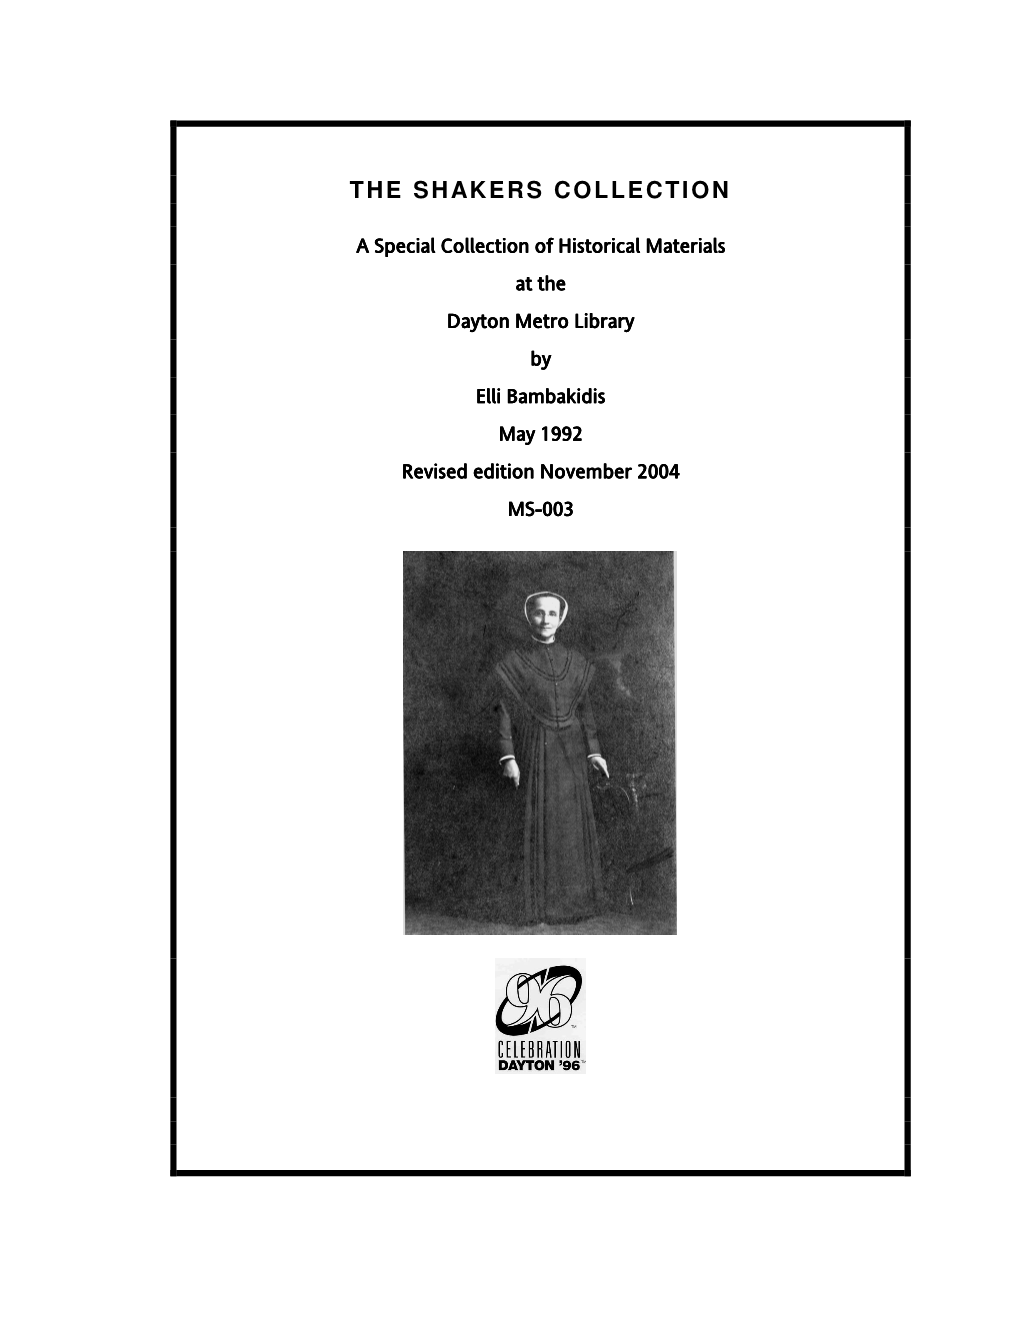 The Shakers Collection